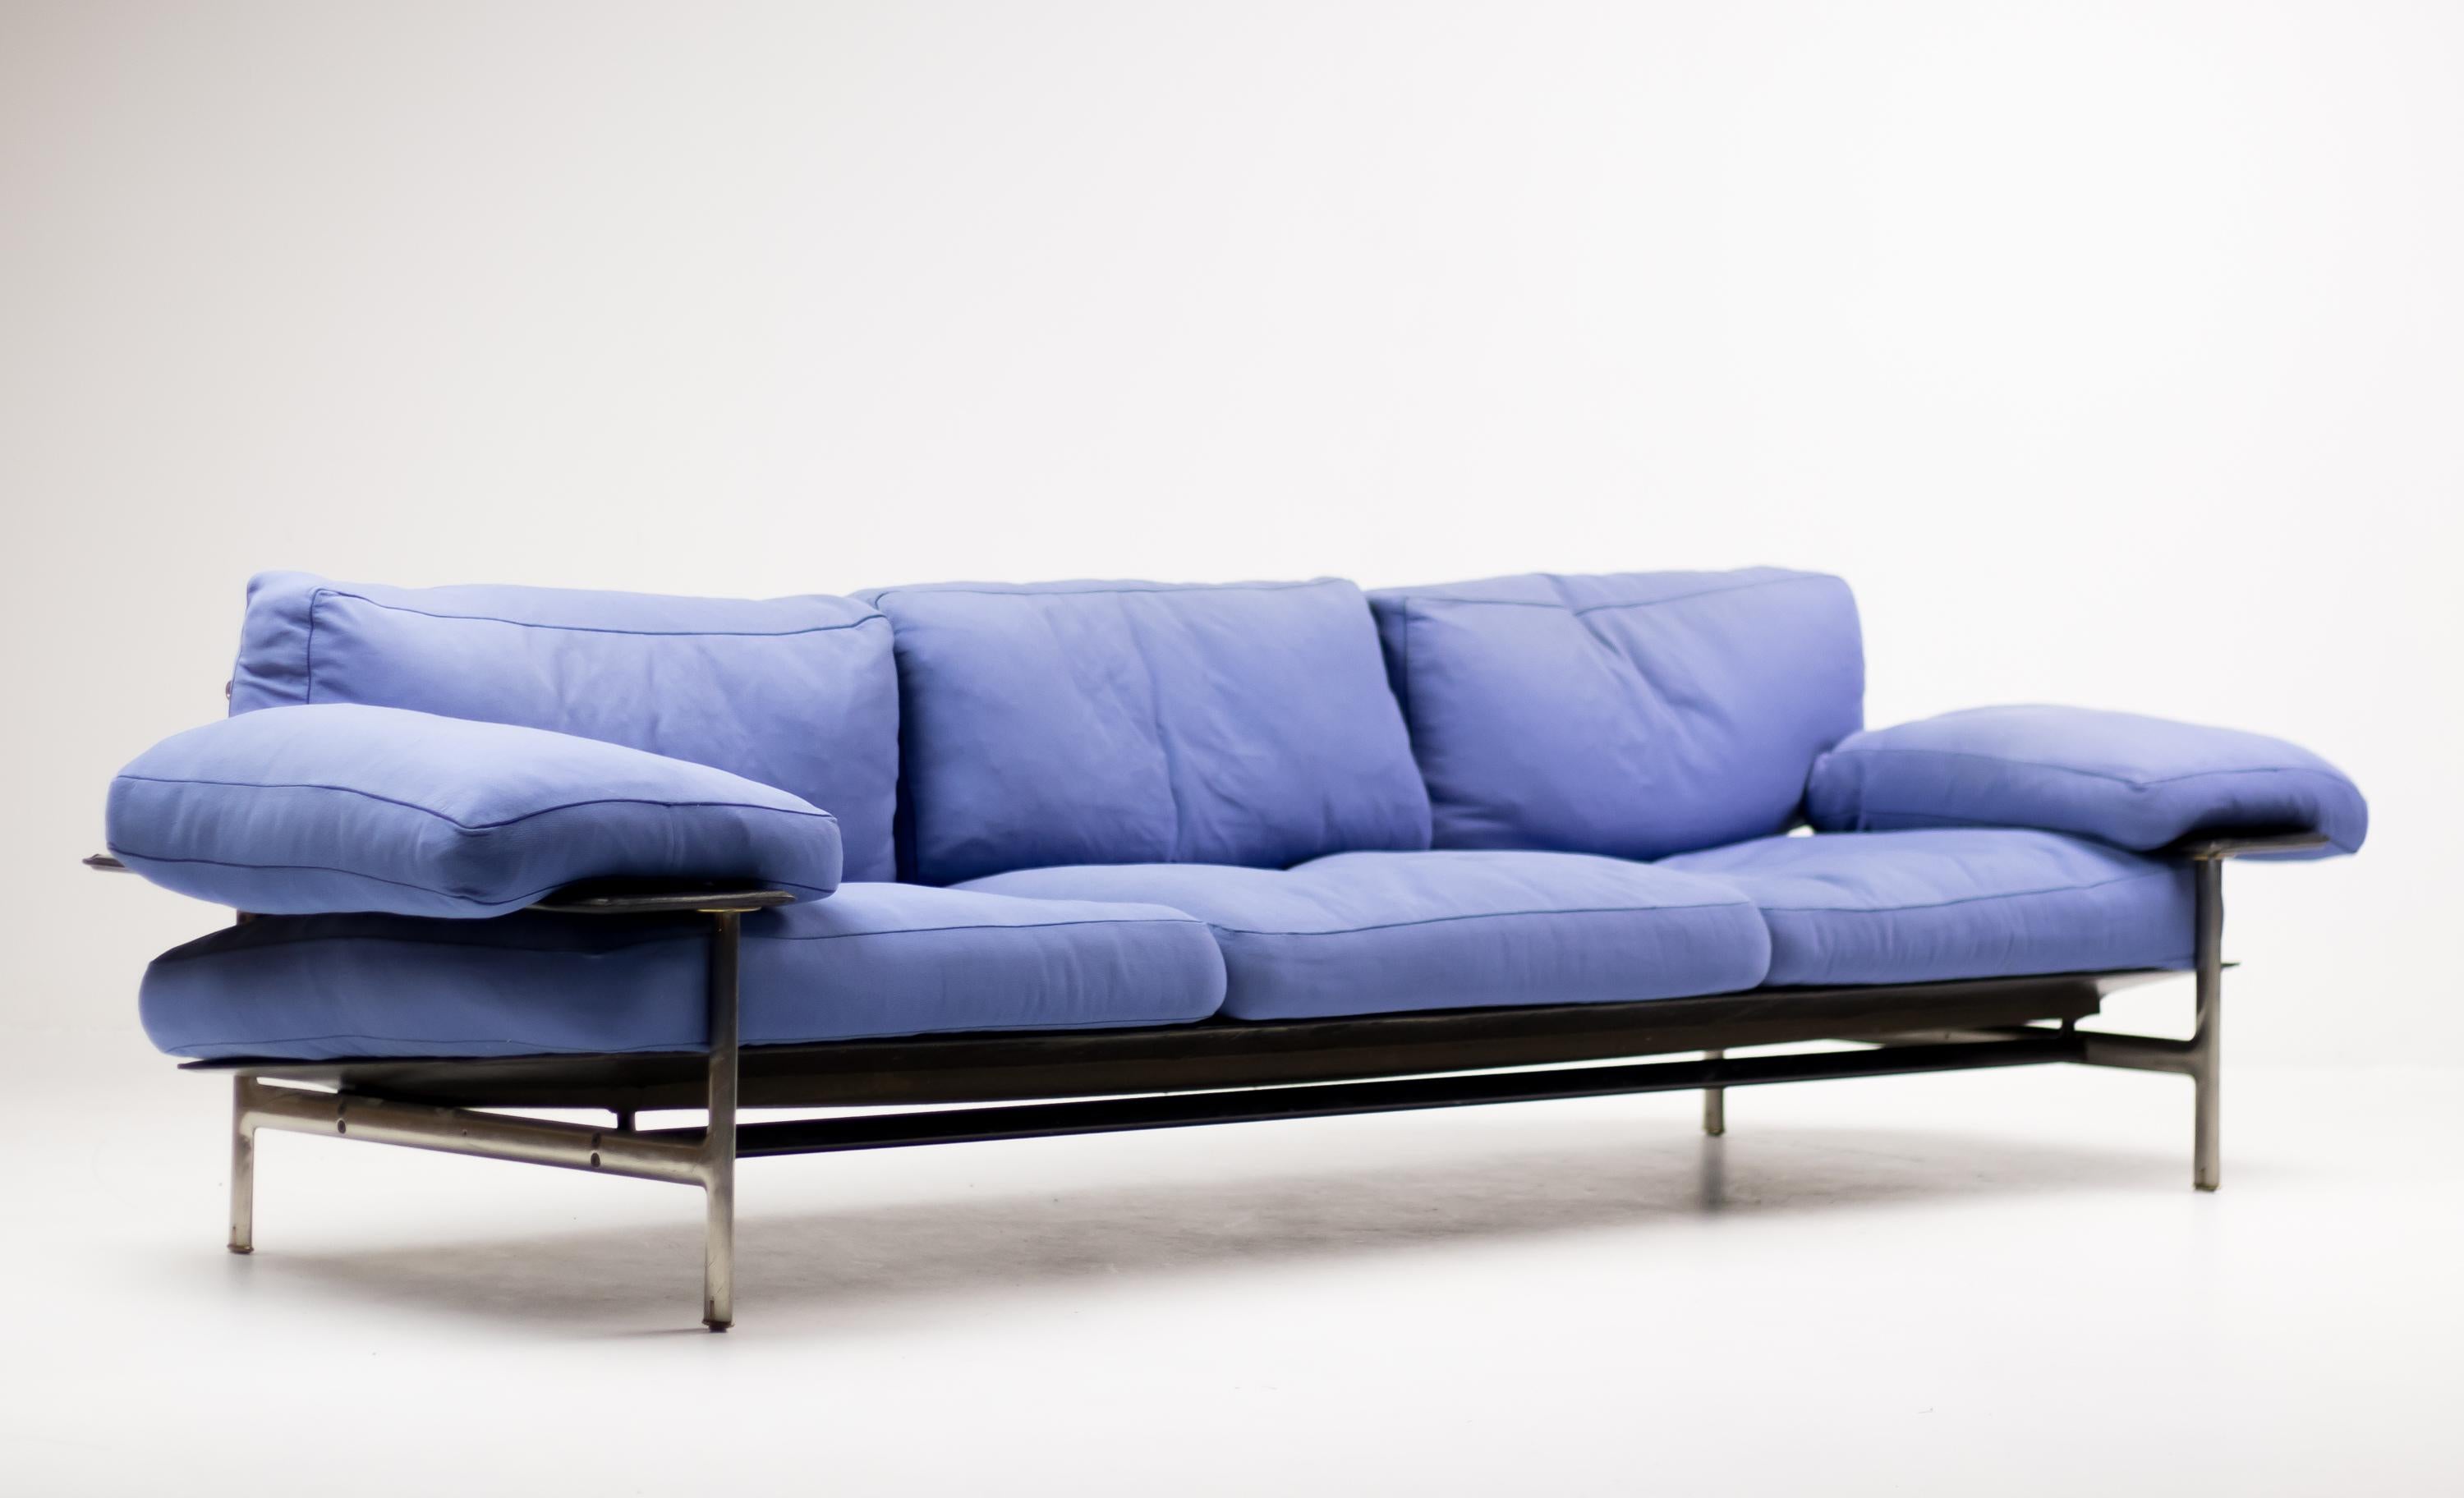 Diesis sofa, designed by Antonio Citterio and Paolo Nava for B&B Italia, Italy in 1979.
The epitome of innovative research and sophisticated handcrafting skills, it has become a landmark in the history of design.
This is the desirable and rare